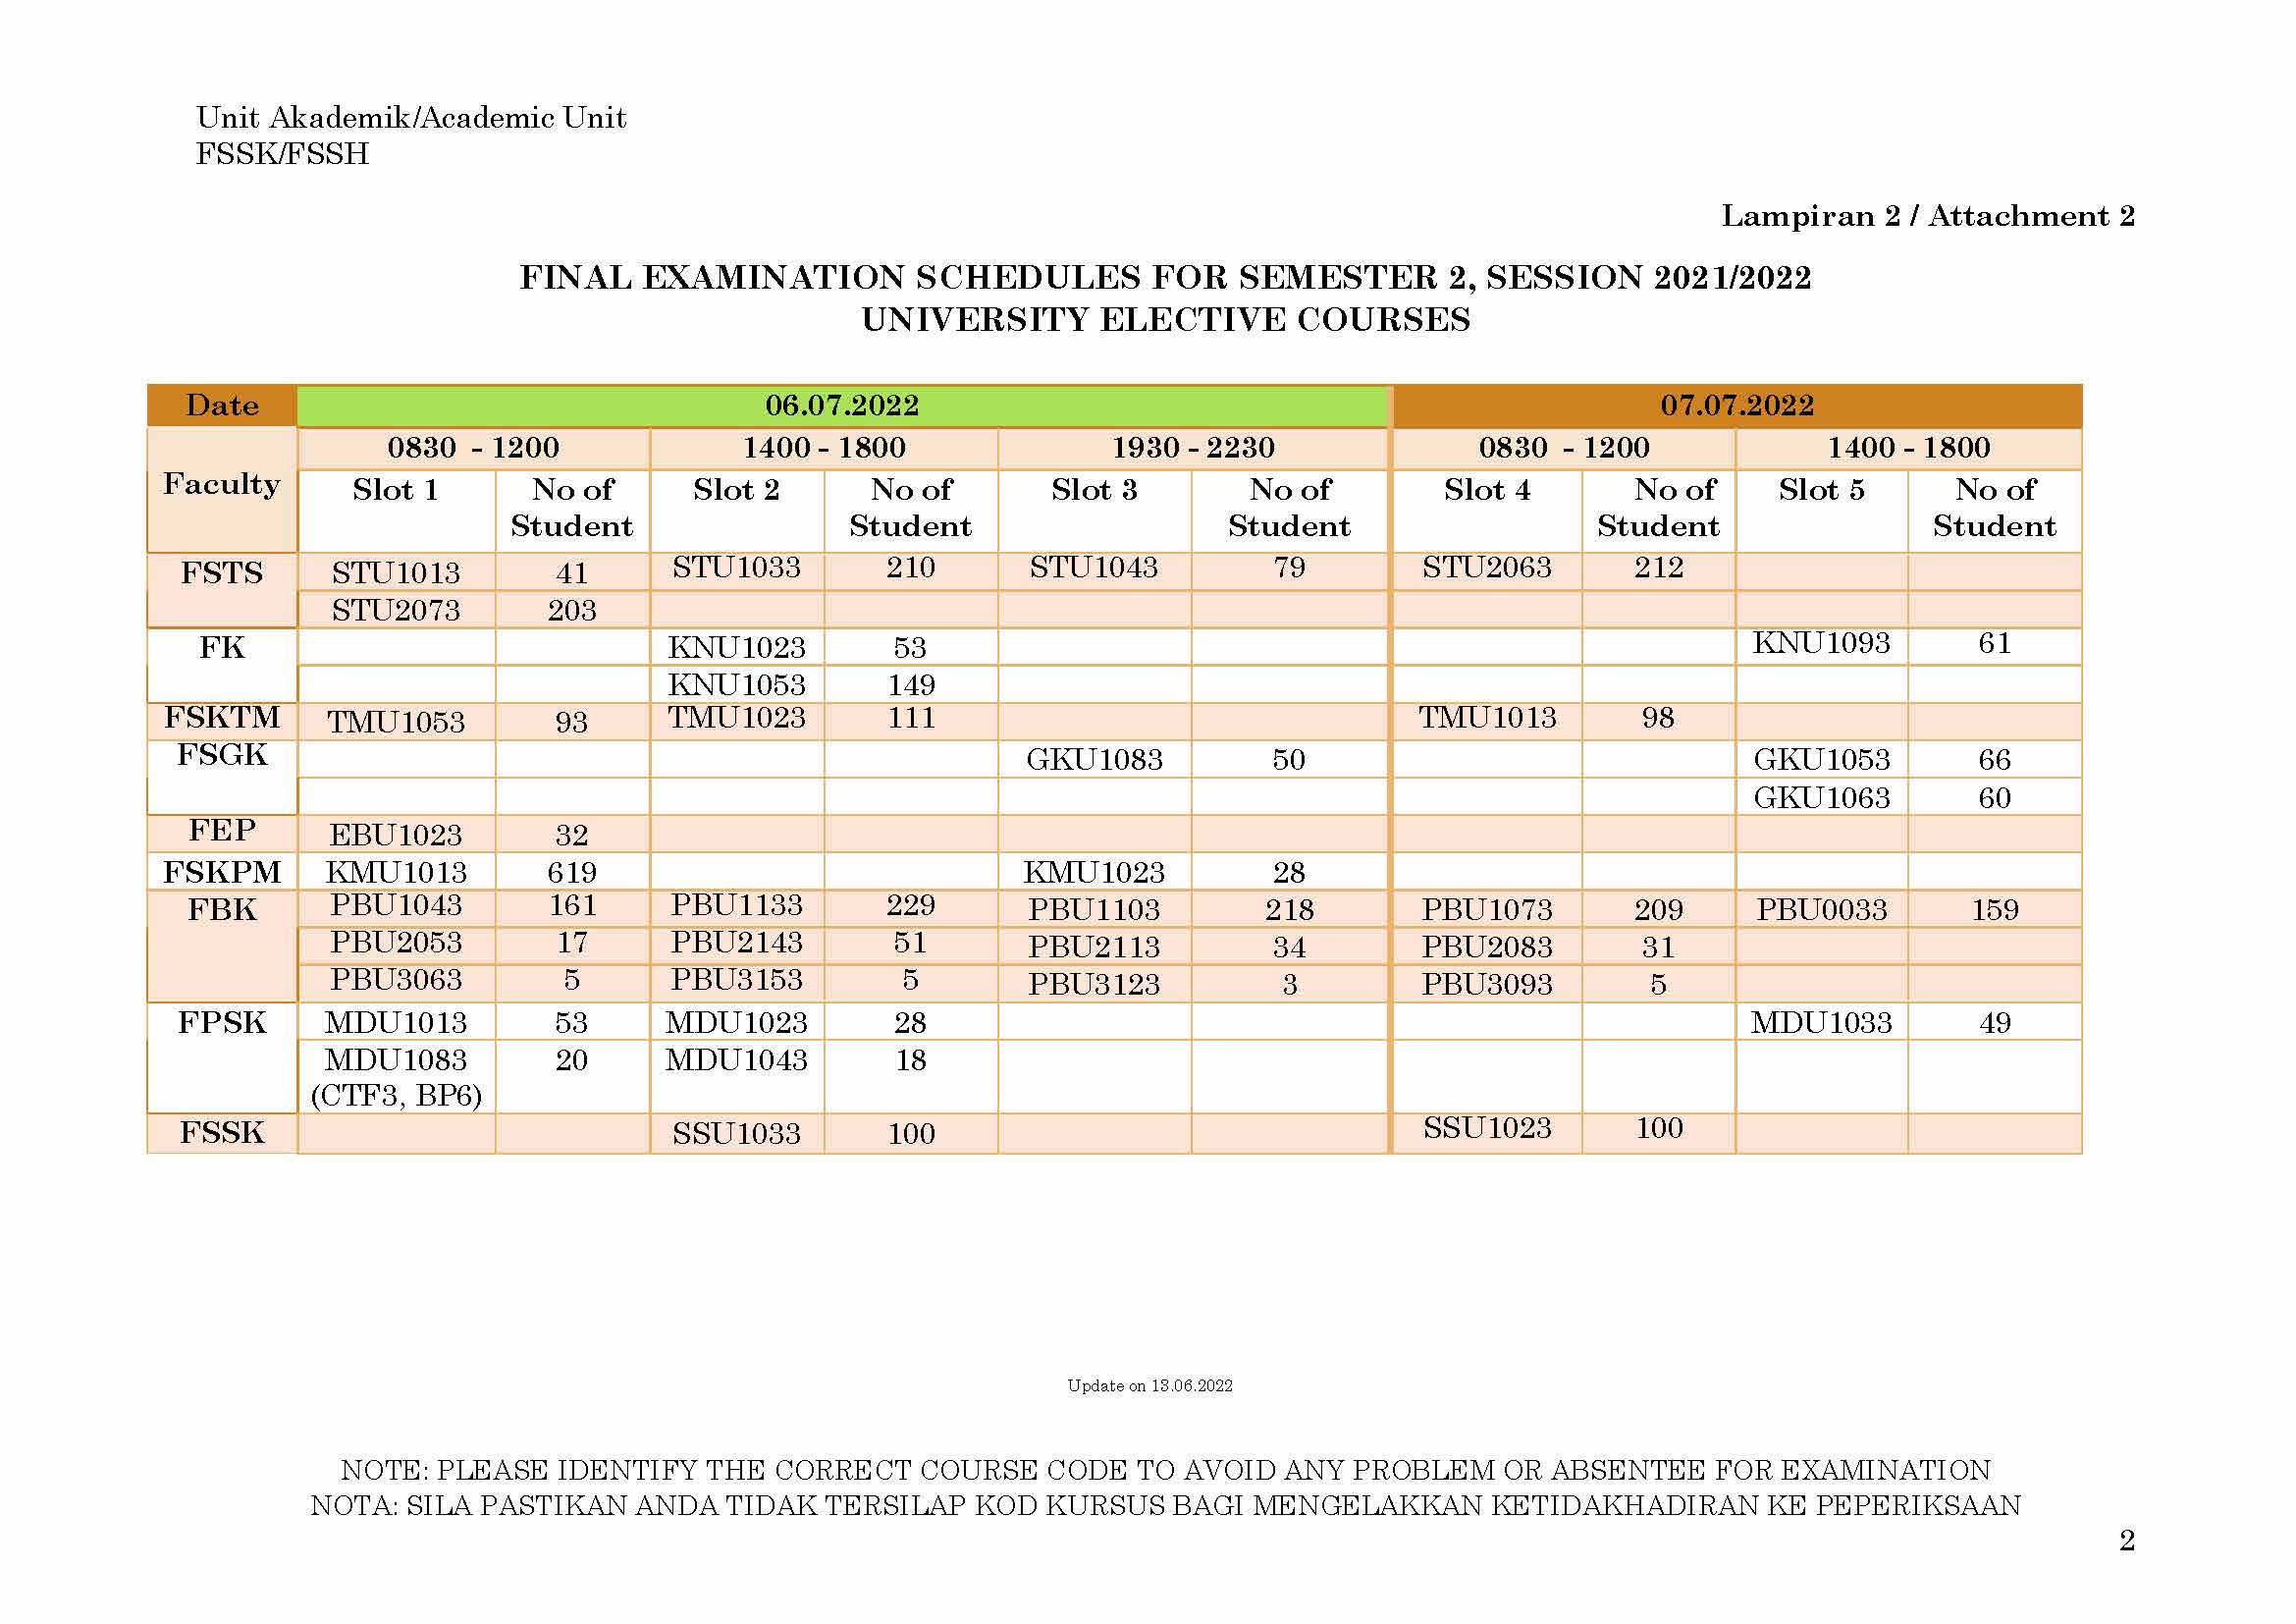 FINAL EXAMINATION SCHEDULES FOR SEMESTER 2 SESSION 2021 2022 Page 3